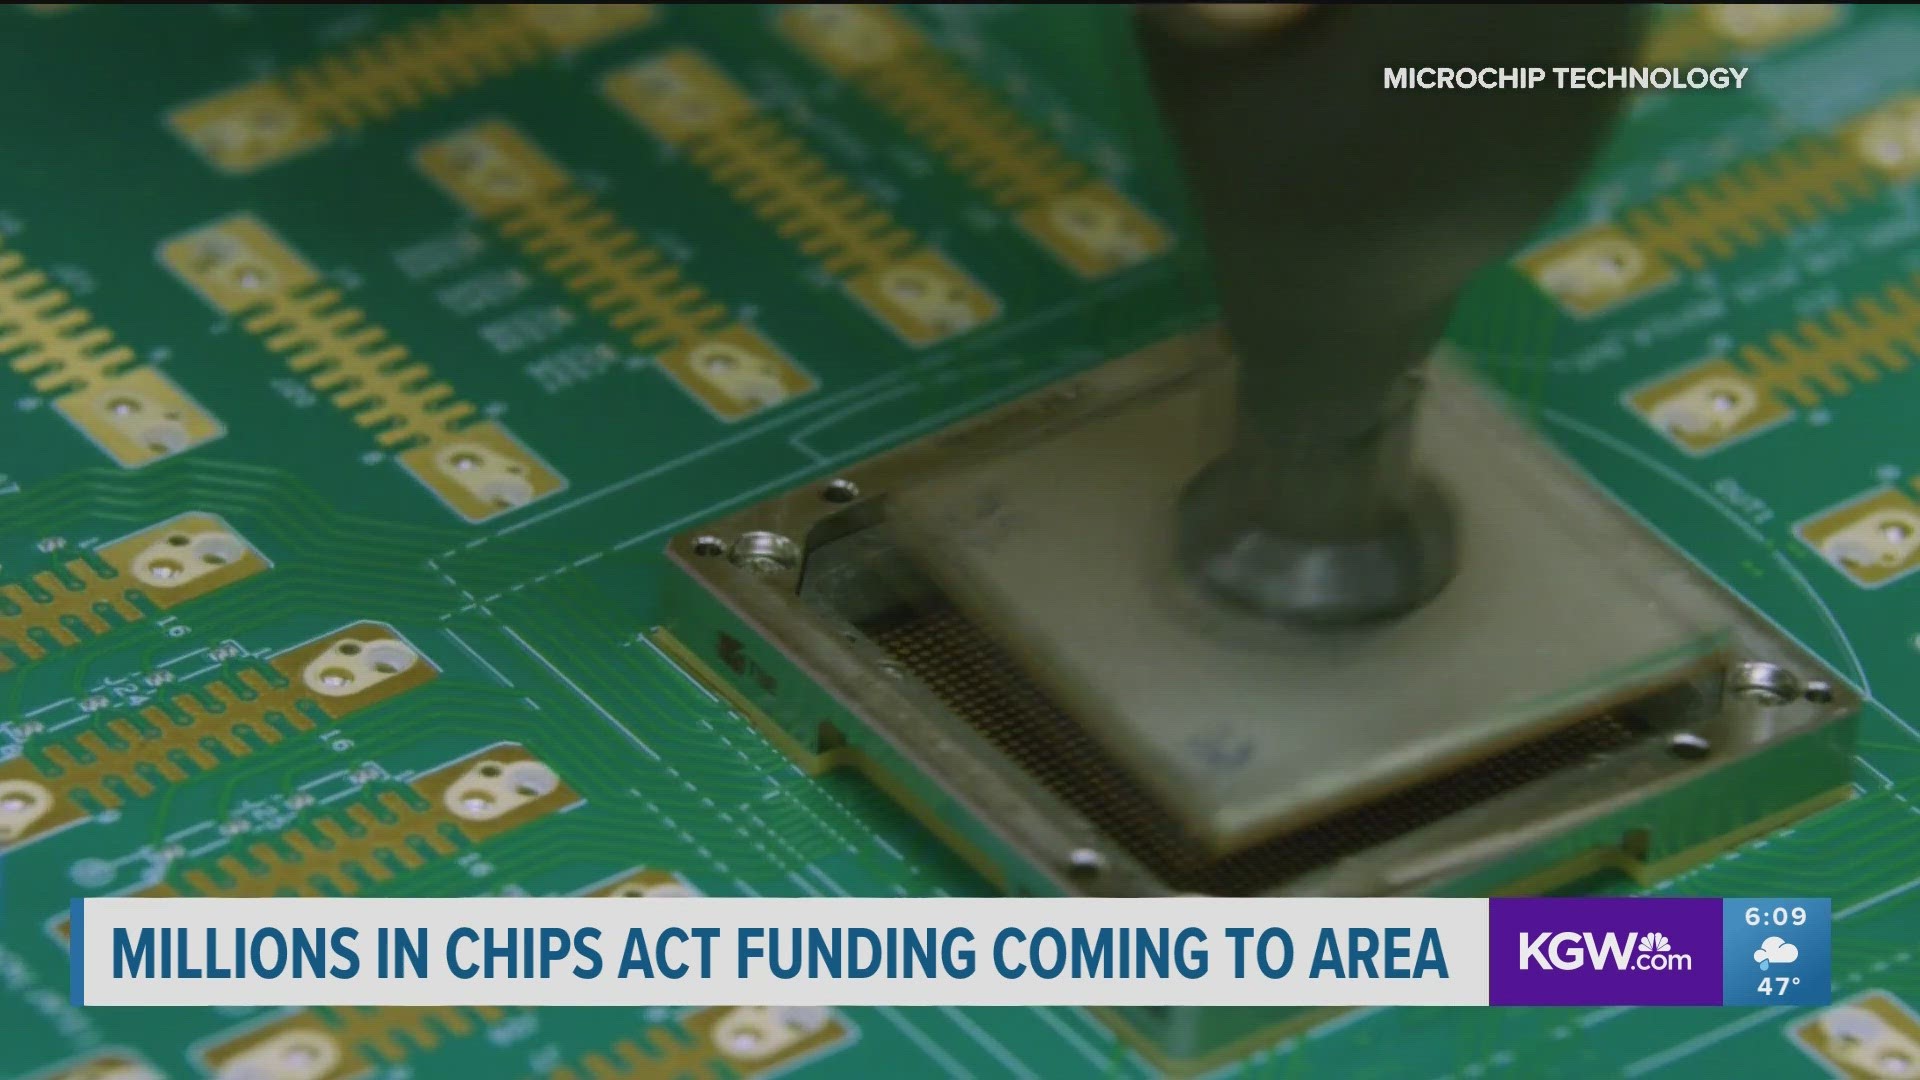 Microchip Technology's expansion in Gresham is expected to triple its microcontroller unit output and add roughly 600 jobs.